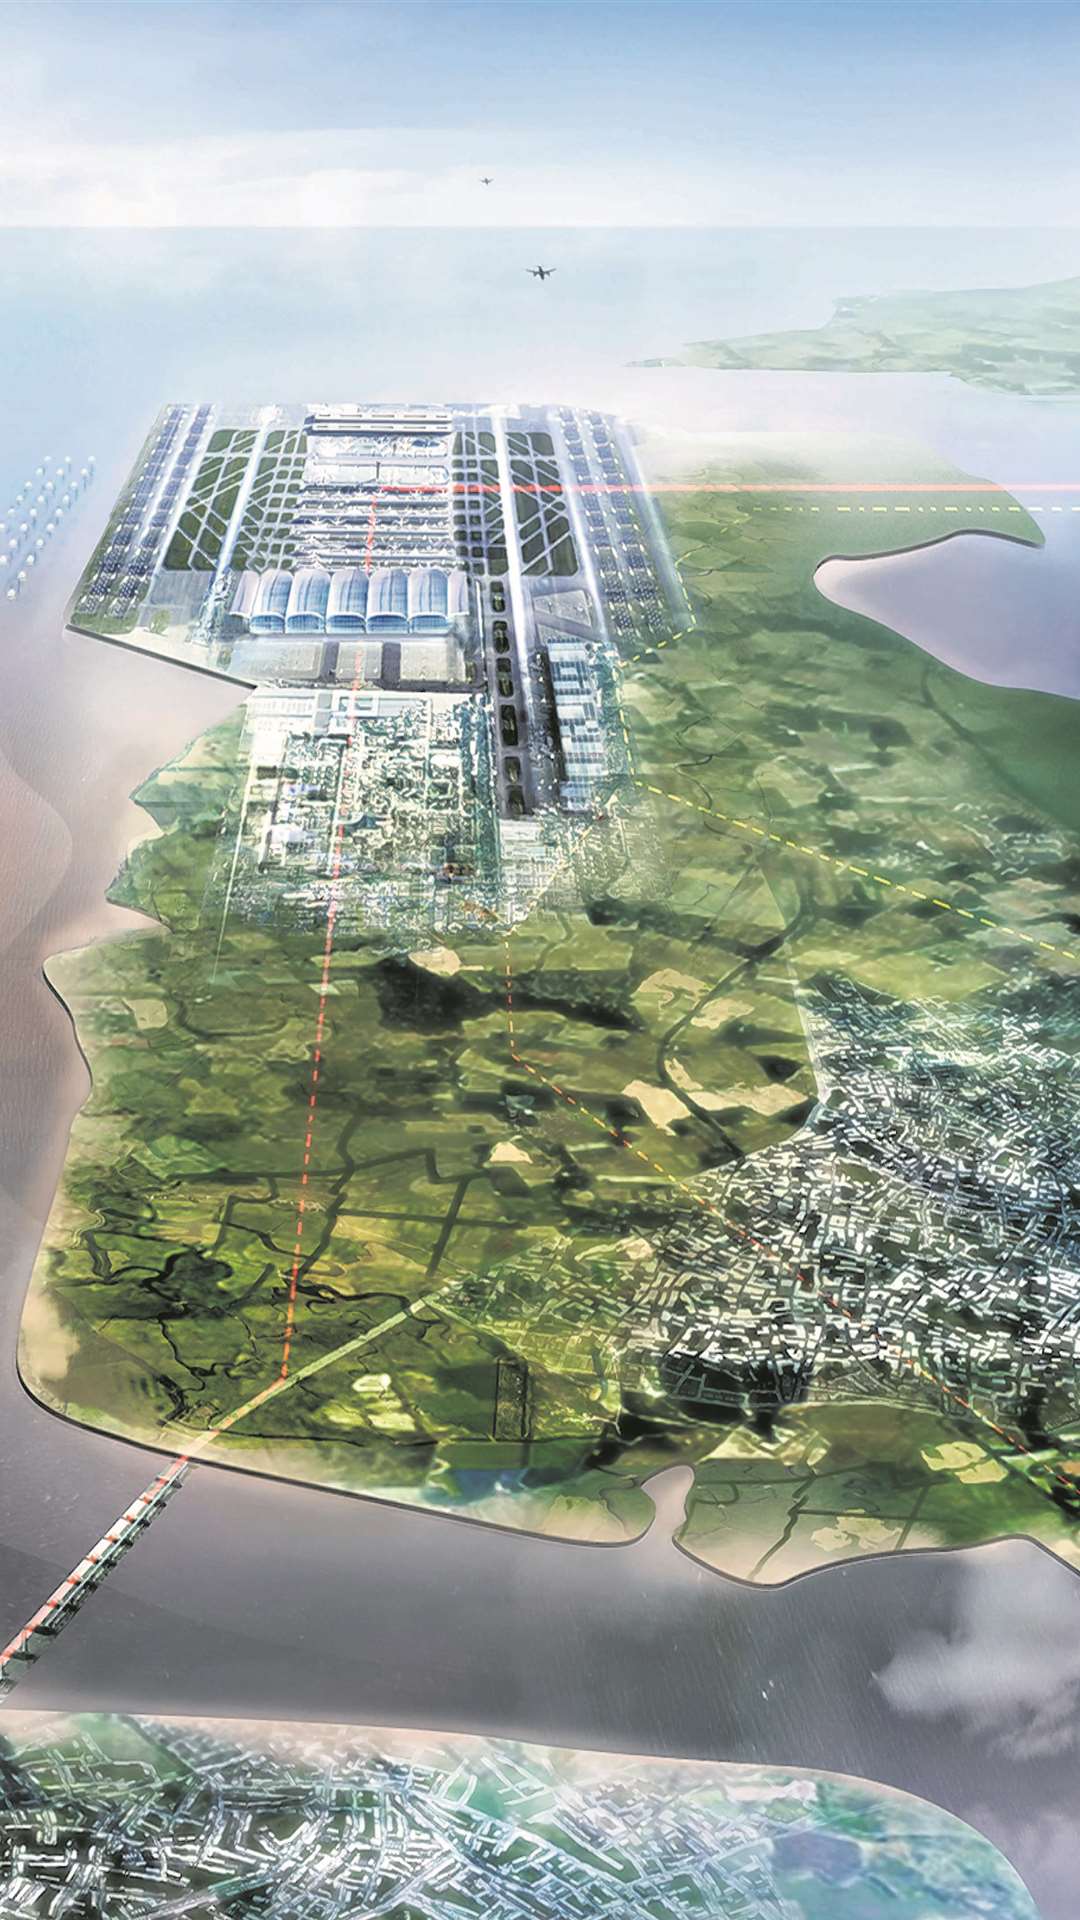 How architect Lord Foster's vision for an airport at Grain in the Thames Estuary could have looked